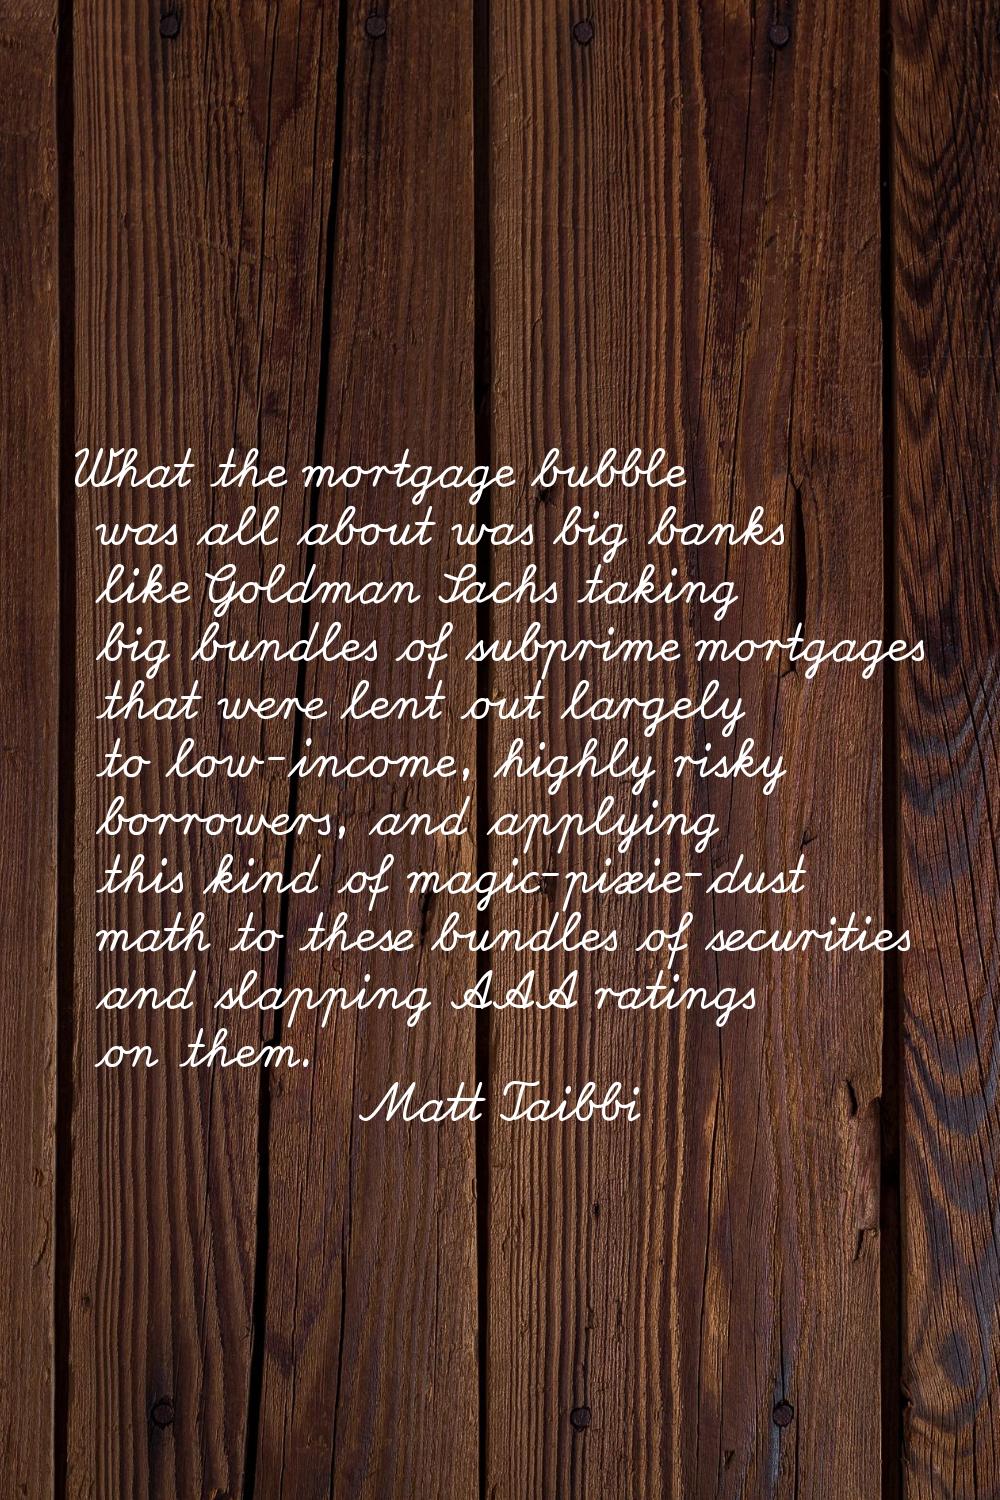 What the mortgage bubble was all about was big banks like Goldman Sachs taking big bundles of subpr